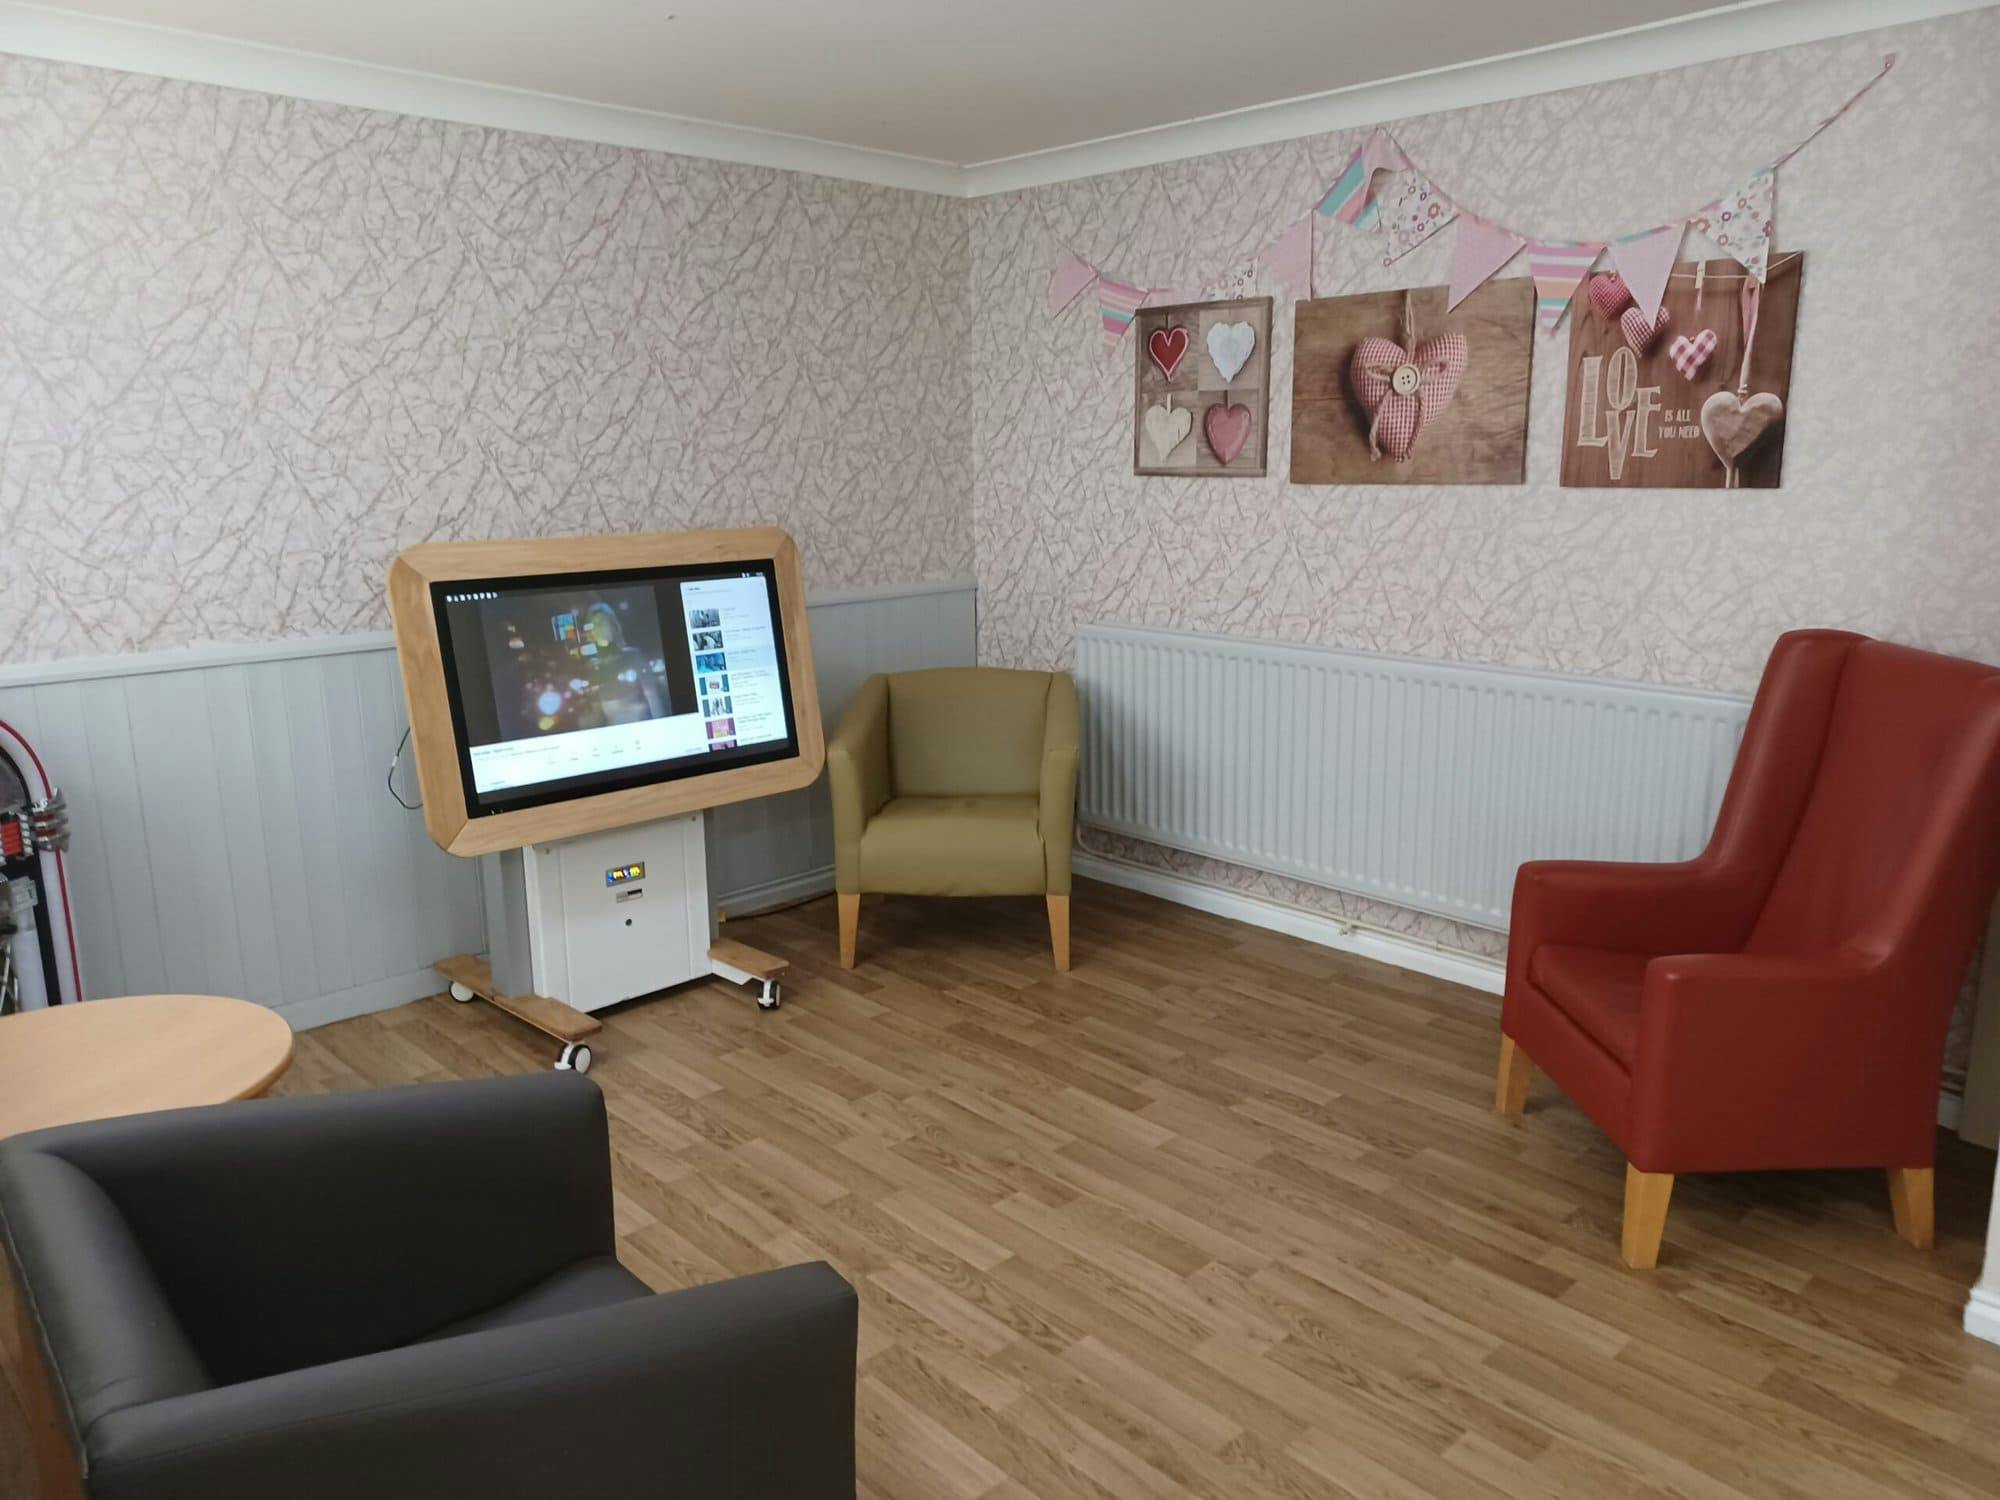 Communal area at Saltshouse Have Care Home, Hull 